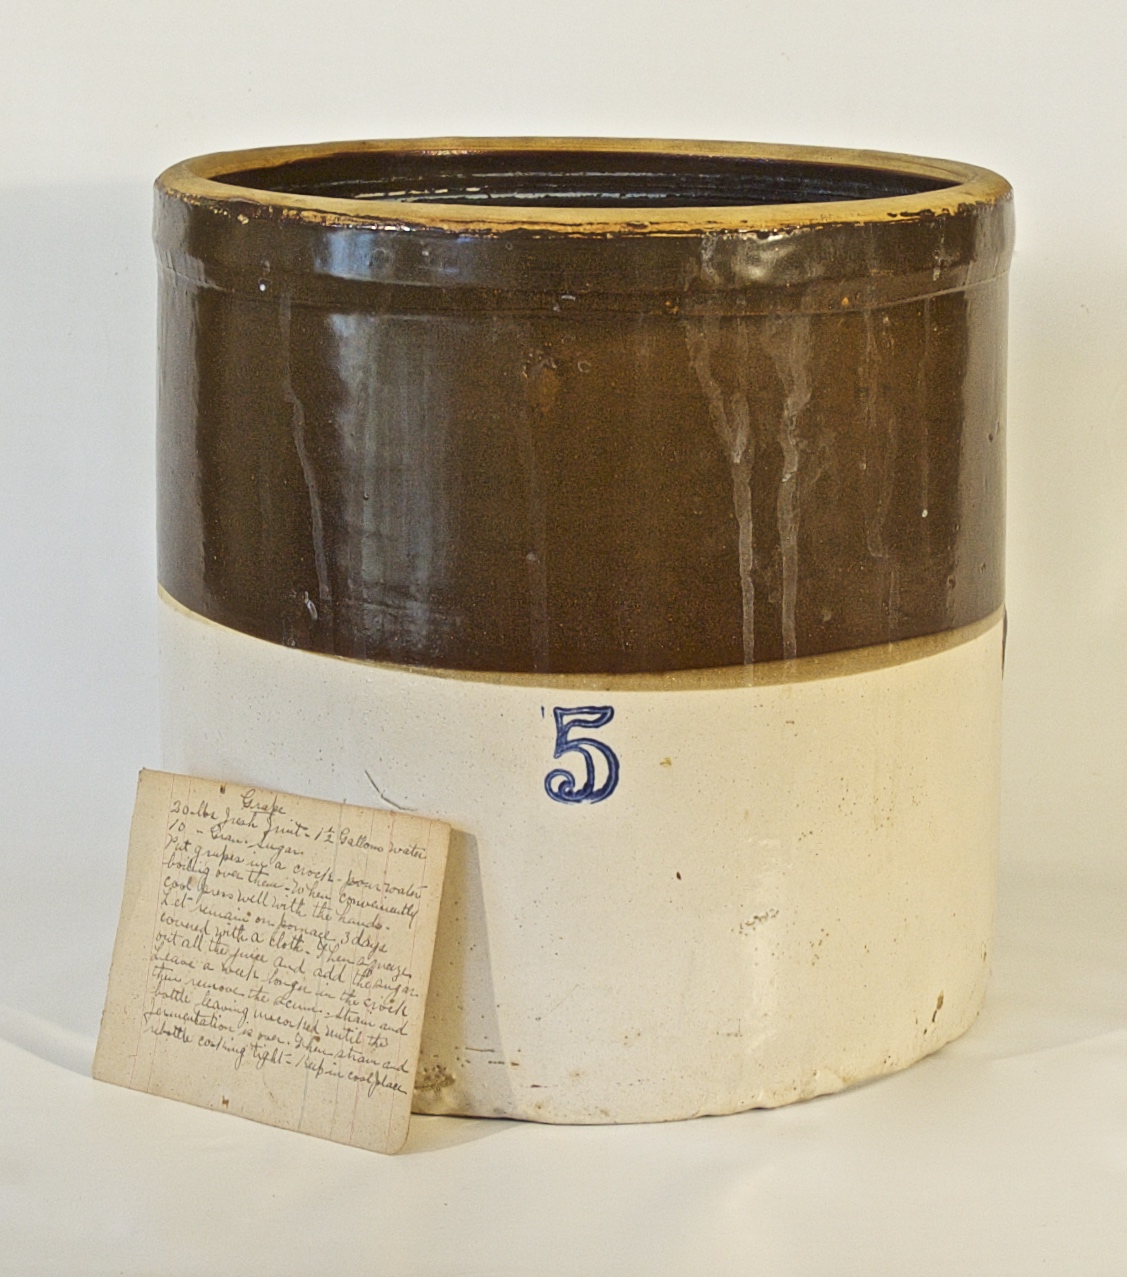 Large ceramic container that was used to make the wine.